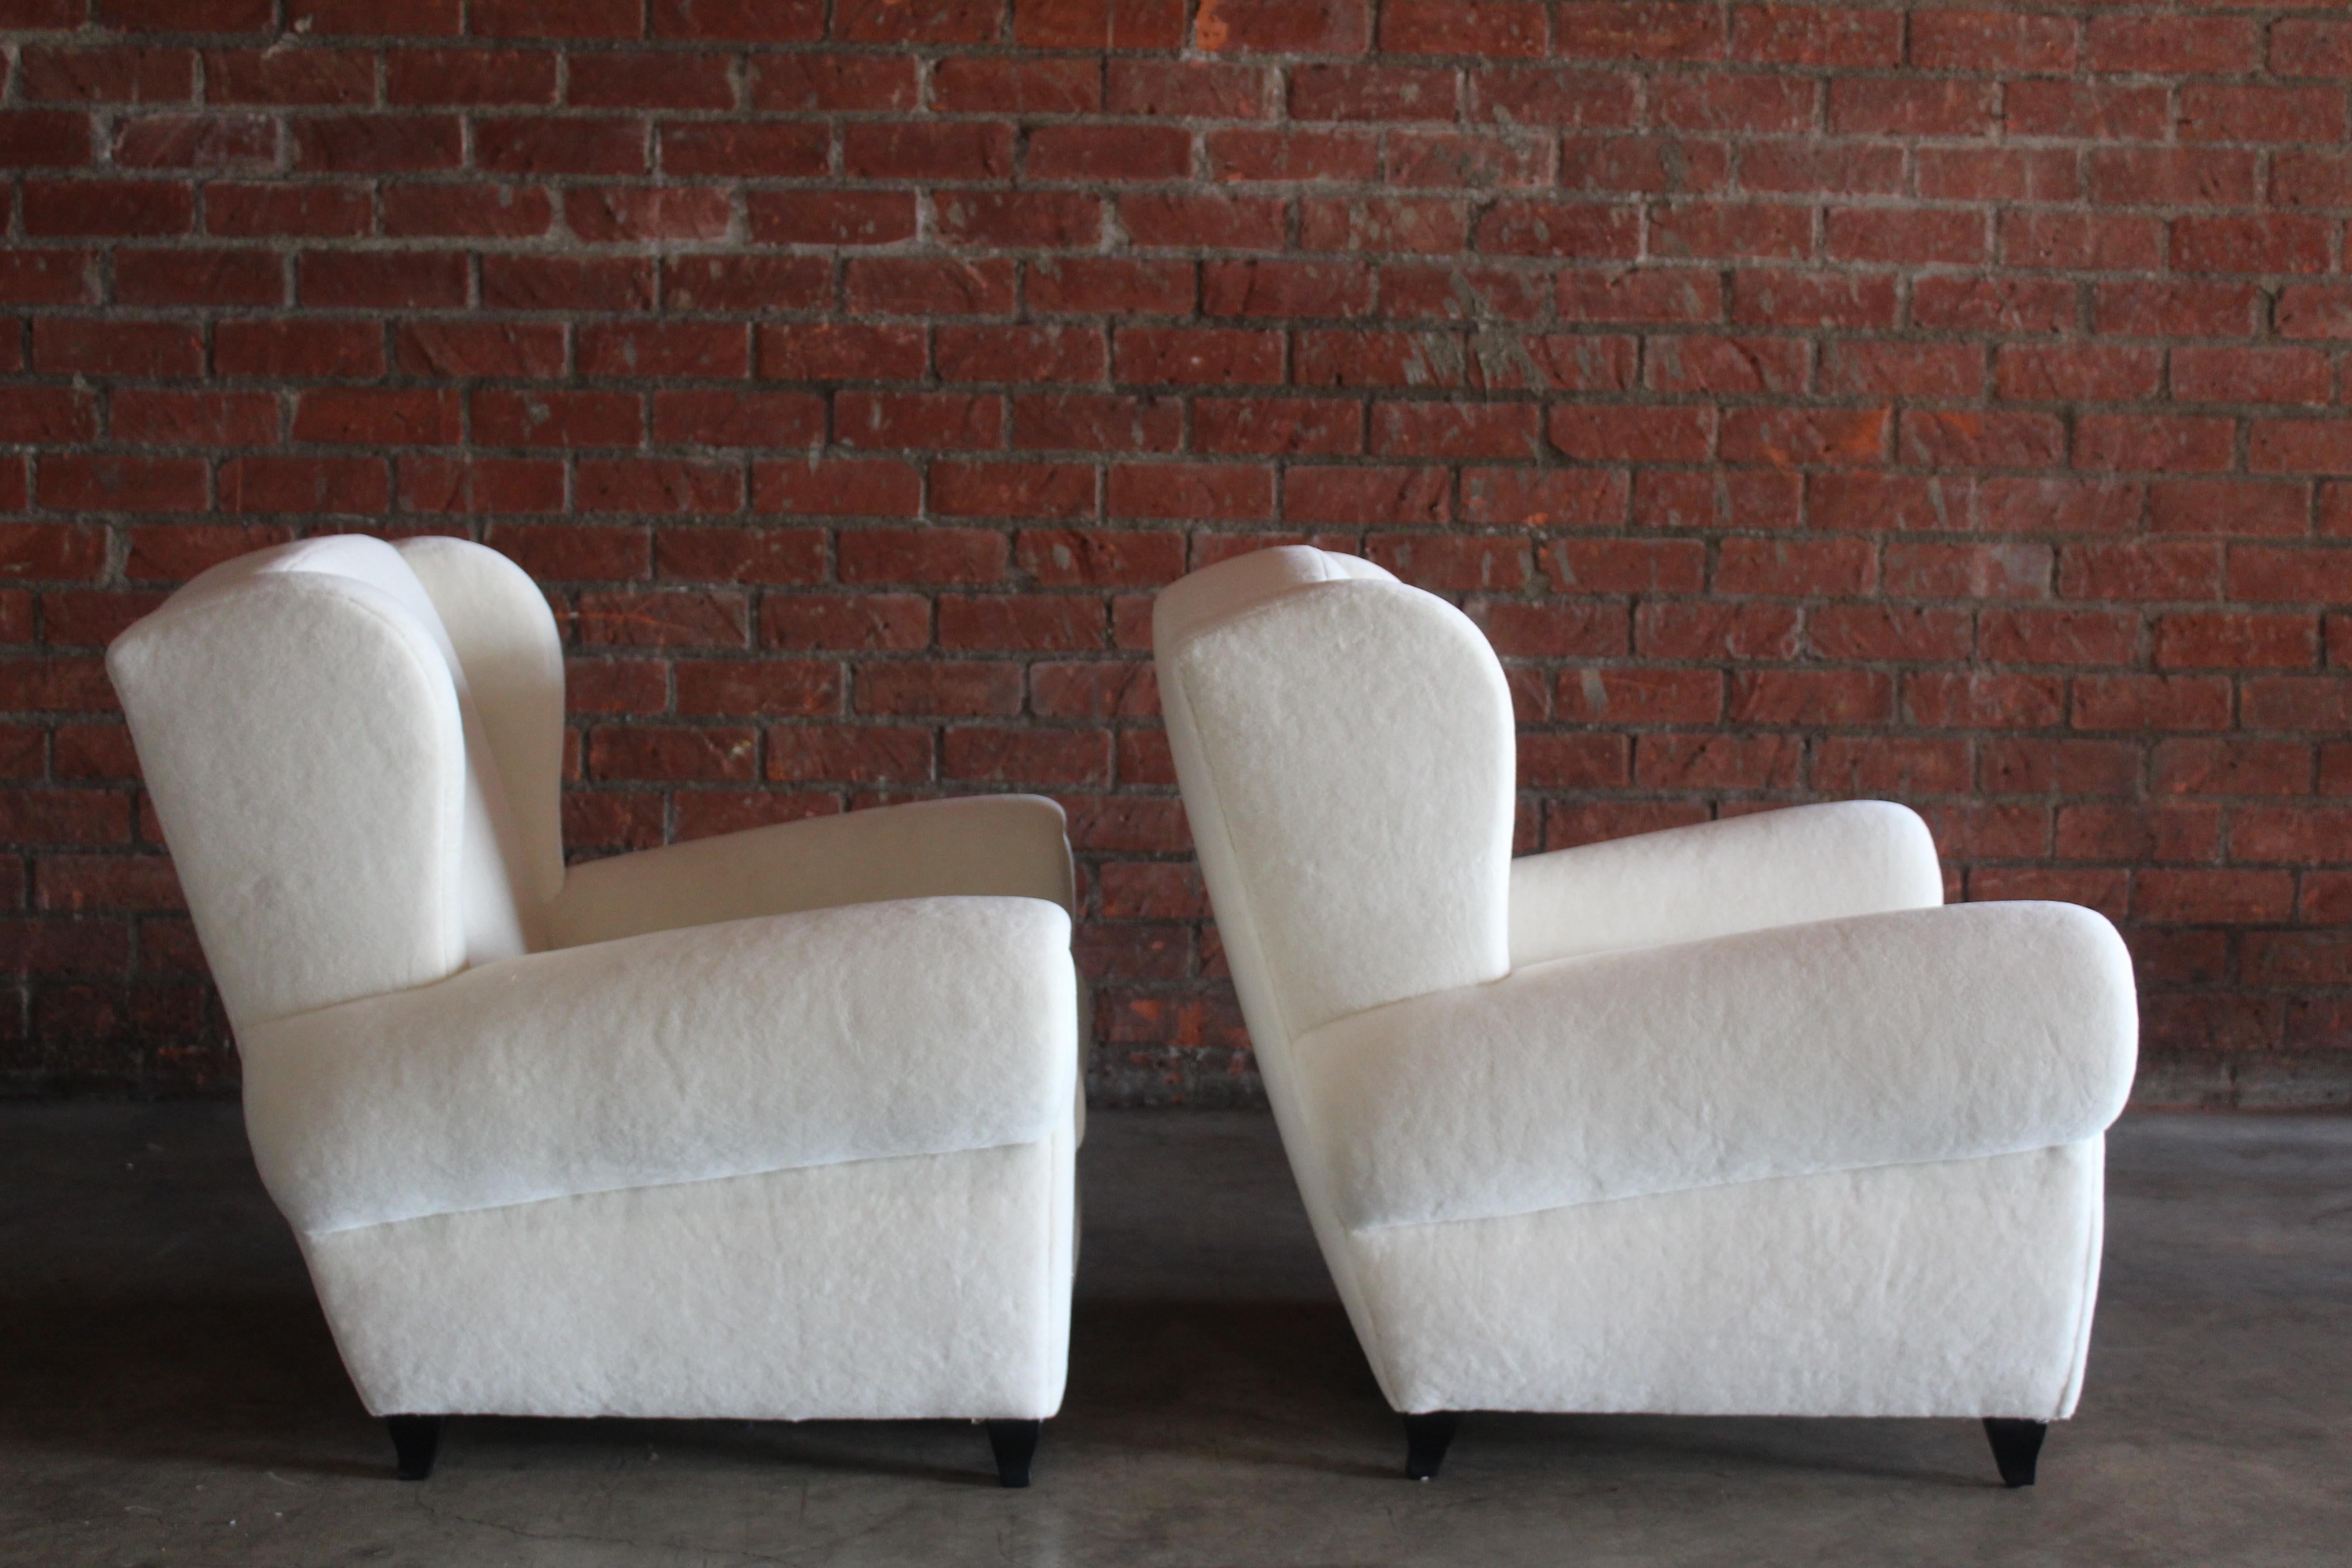 Pair of 1930s Maurice Rinck Style Art Deco French Club Chairs in Alpaca Wool For Sale 6